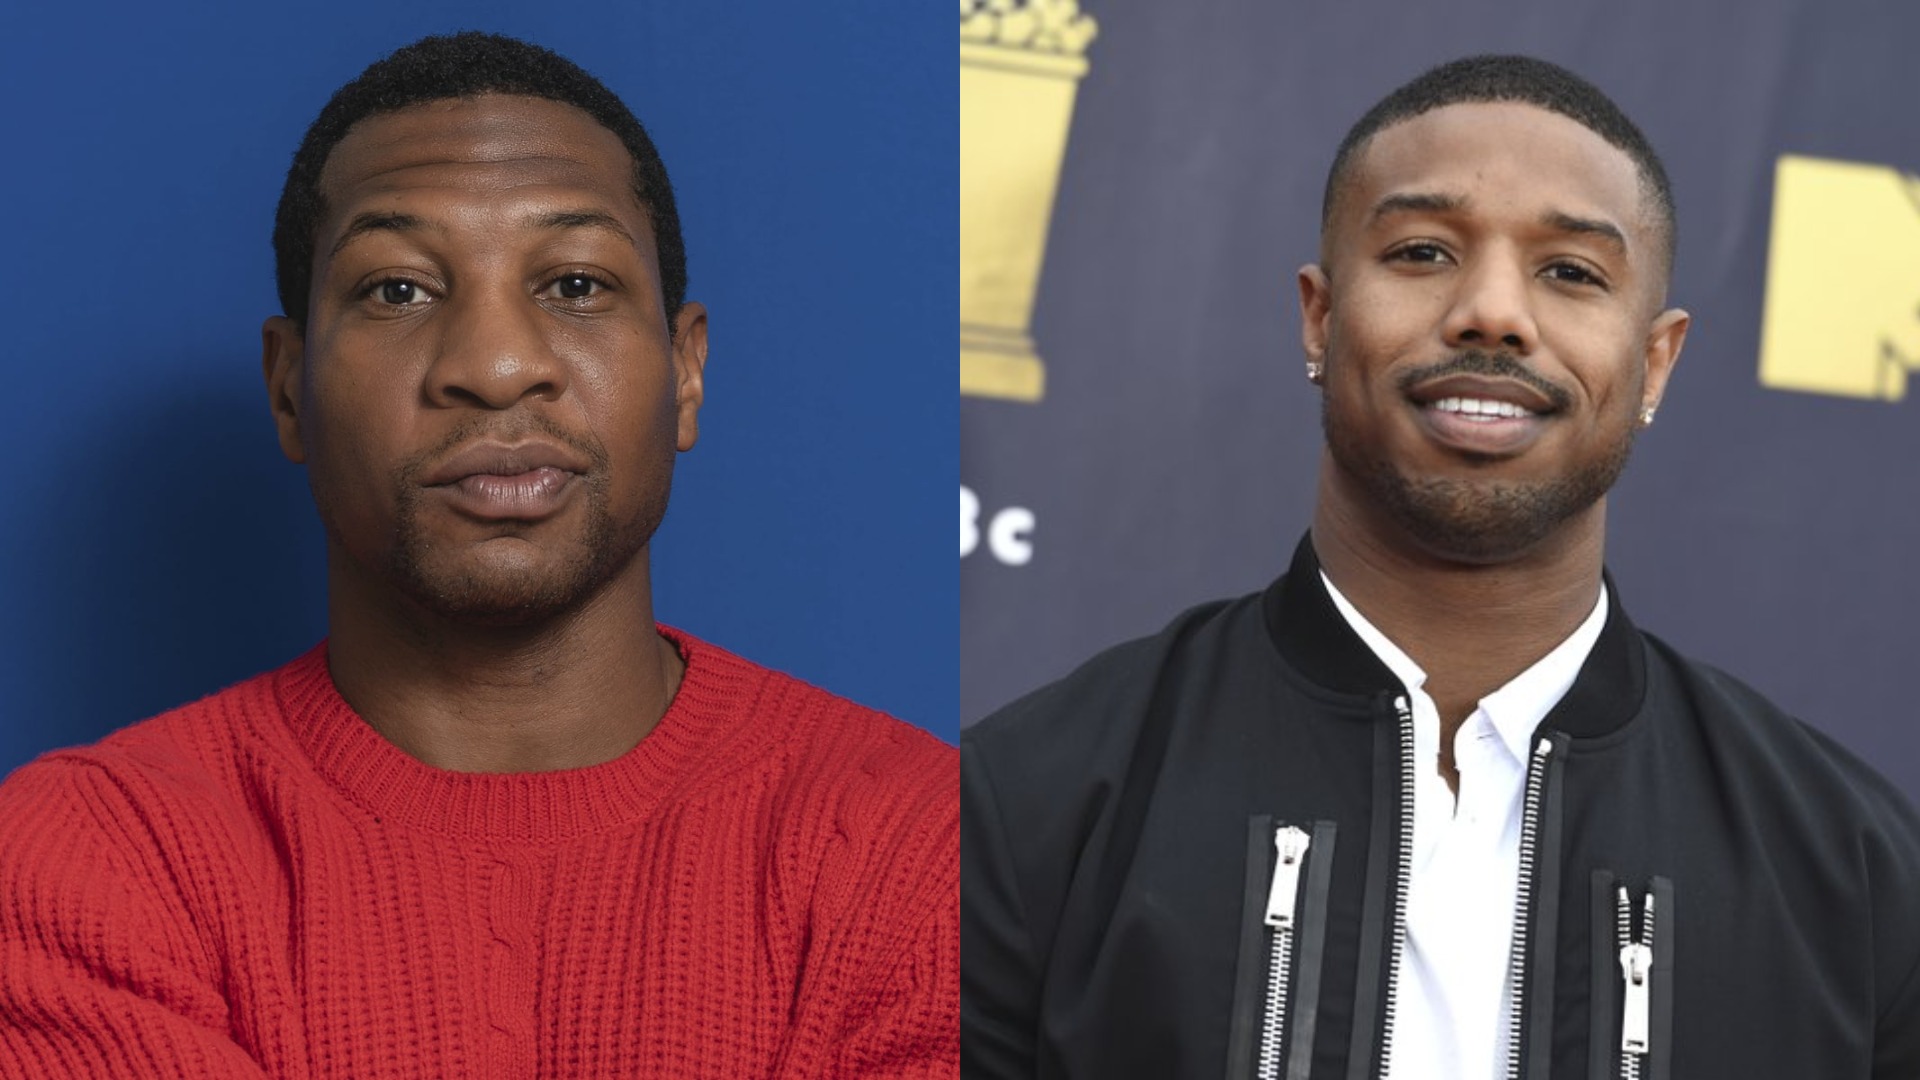 Deadline is exclusively reporting that Jonathan Majors is in negotiations with MGM to star opposite Michael B. Jordan in Creed III.